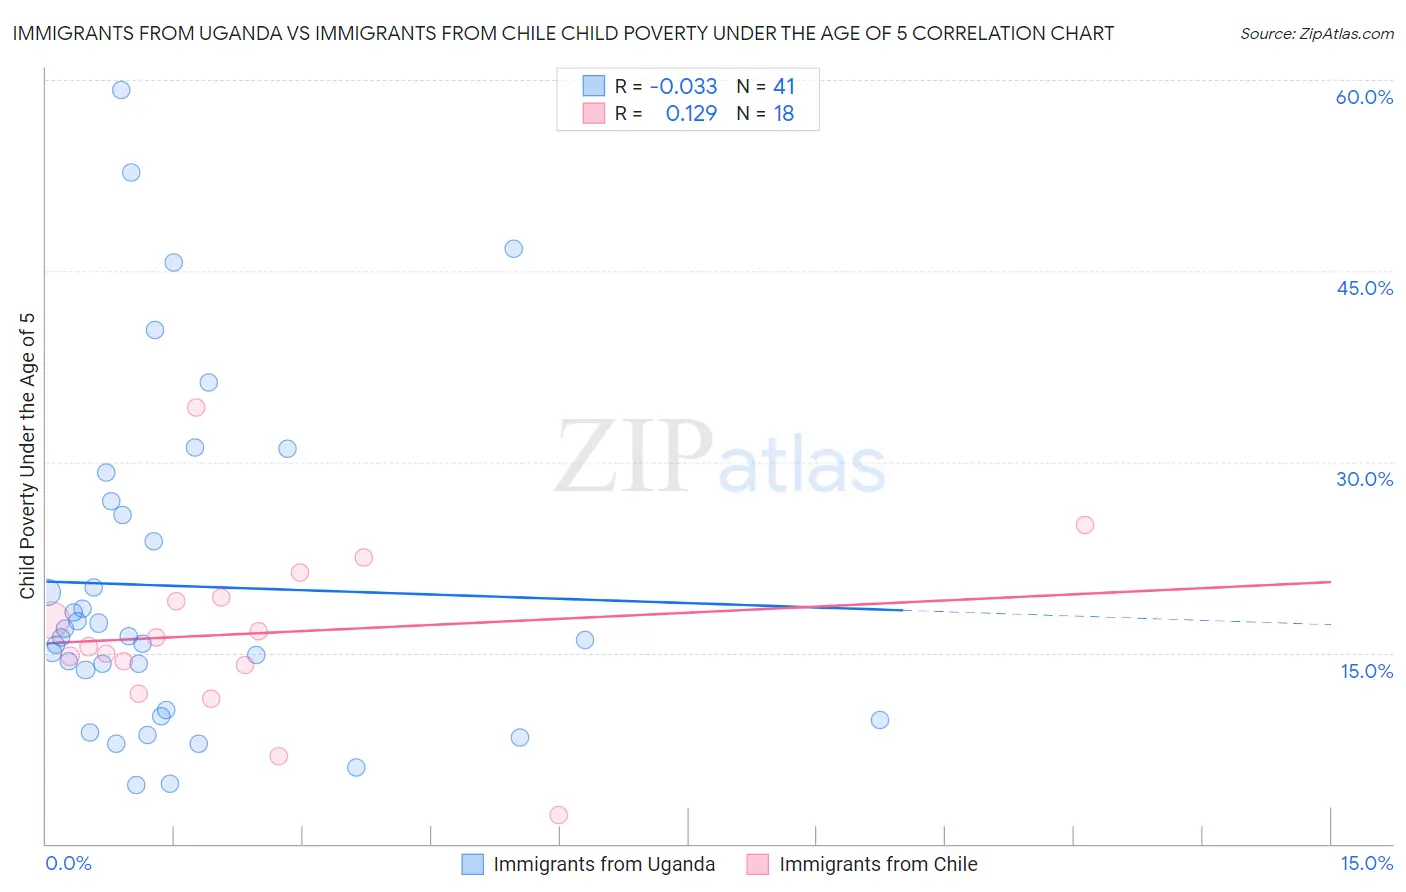 Immigrants from Uganda vs Immigrants from Chile Child Poverty Under the Age of 5